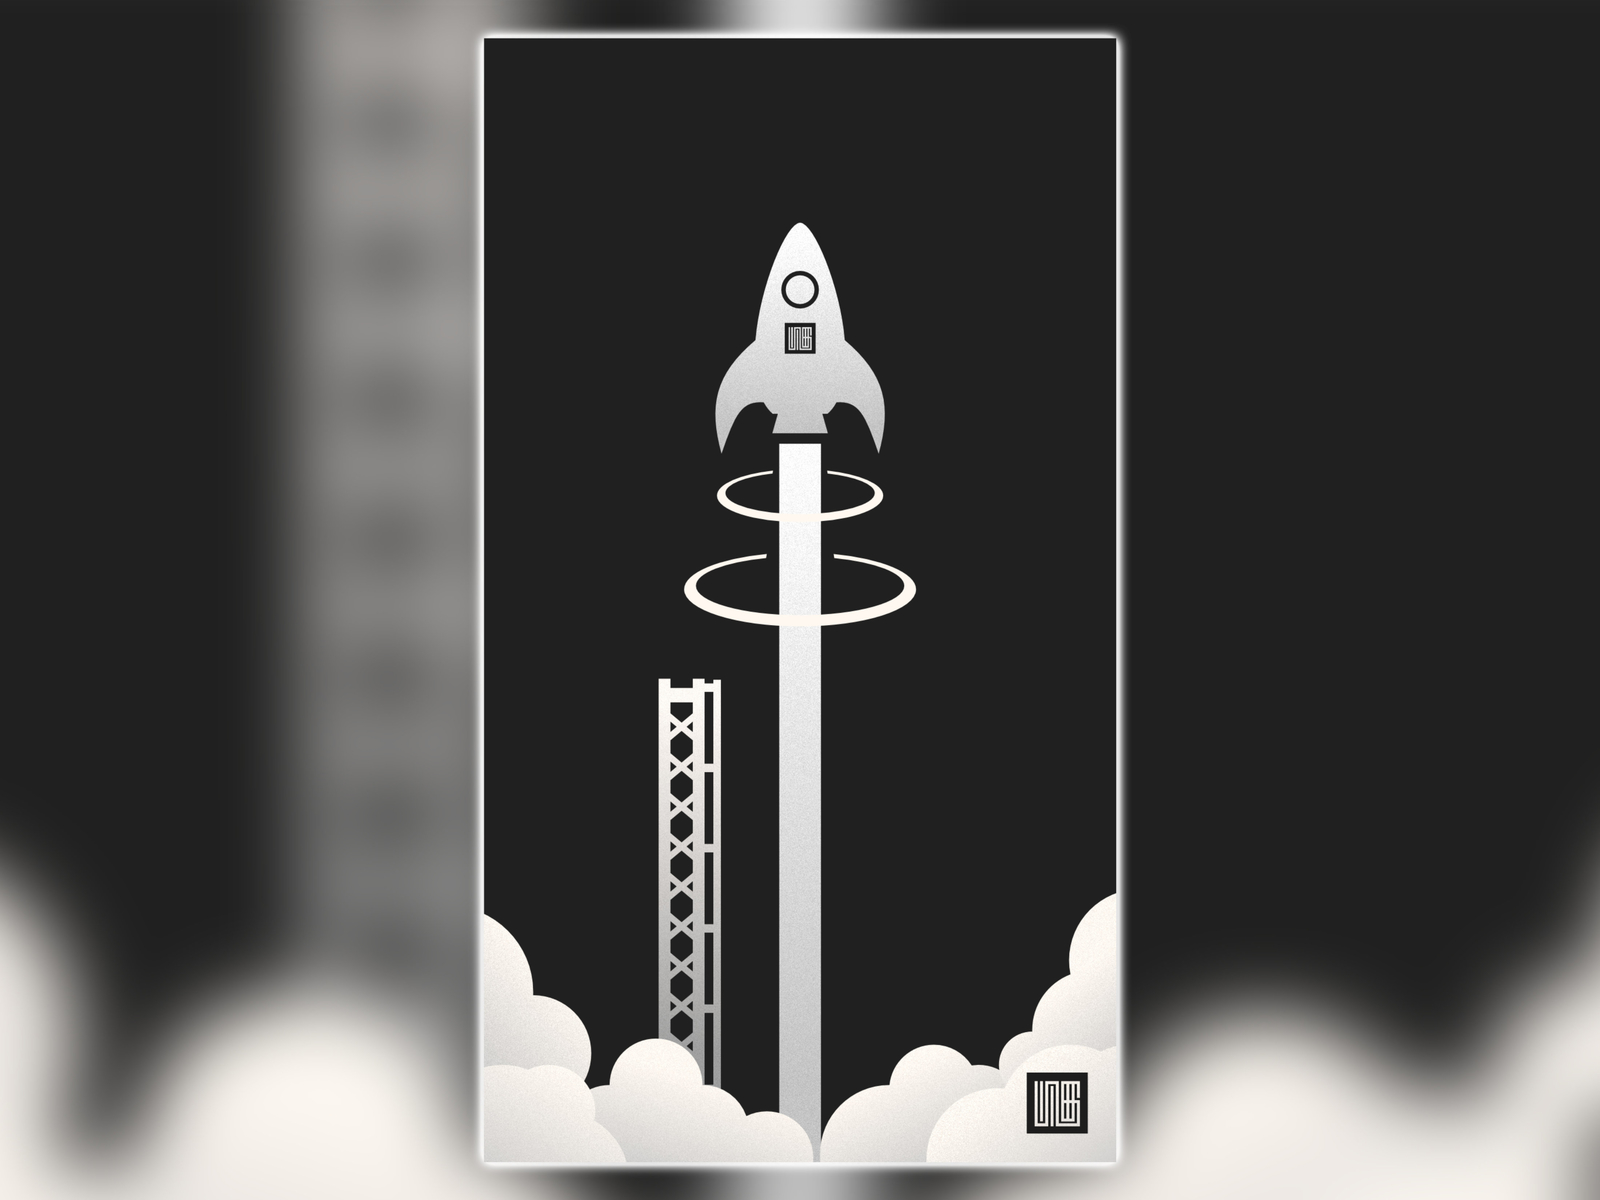 Rocket Noir (wallpaper for smartphone) by Restia Mely Anugrah on Dribbble